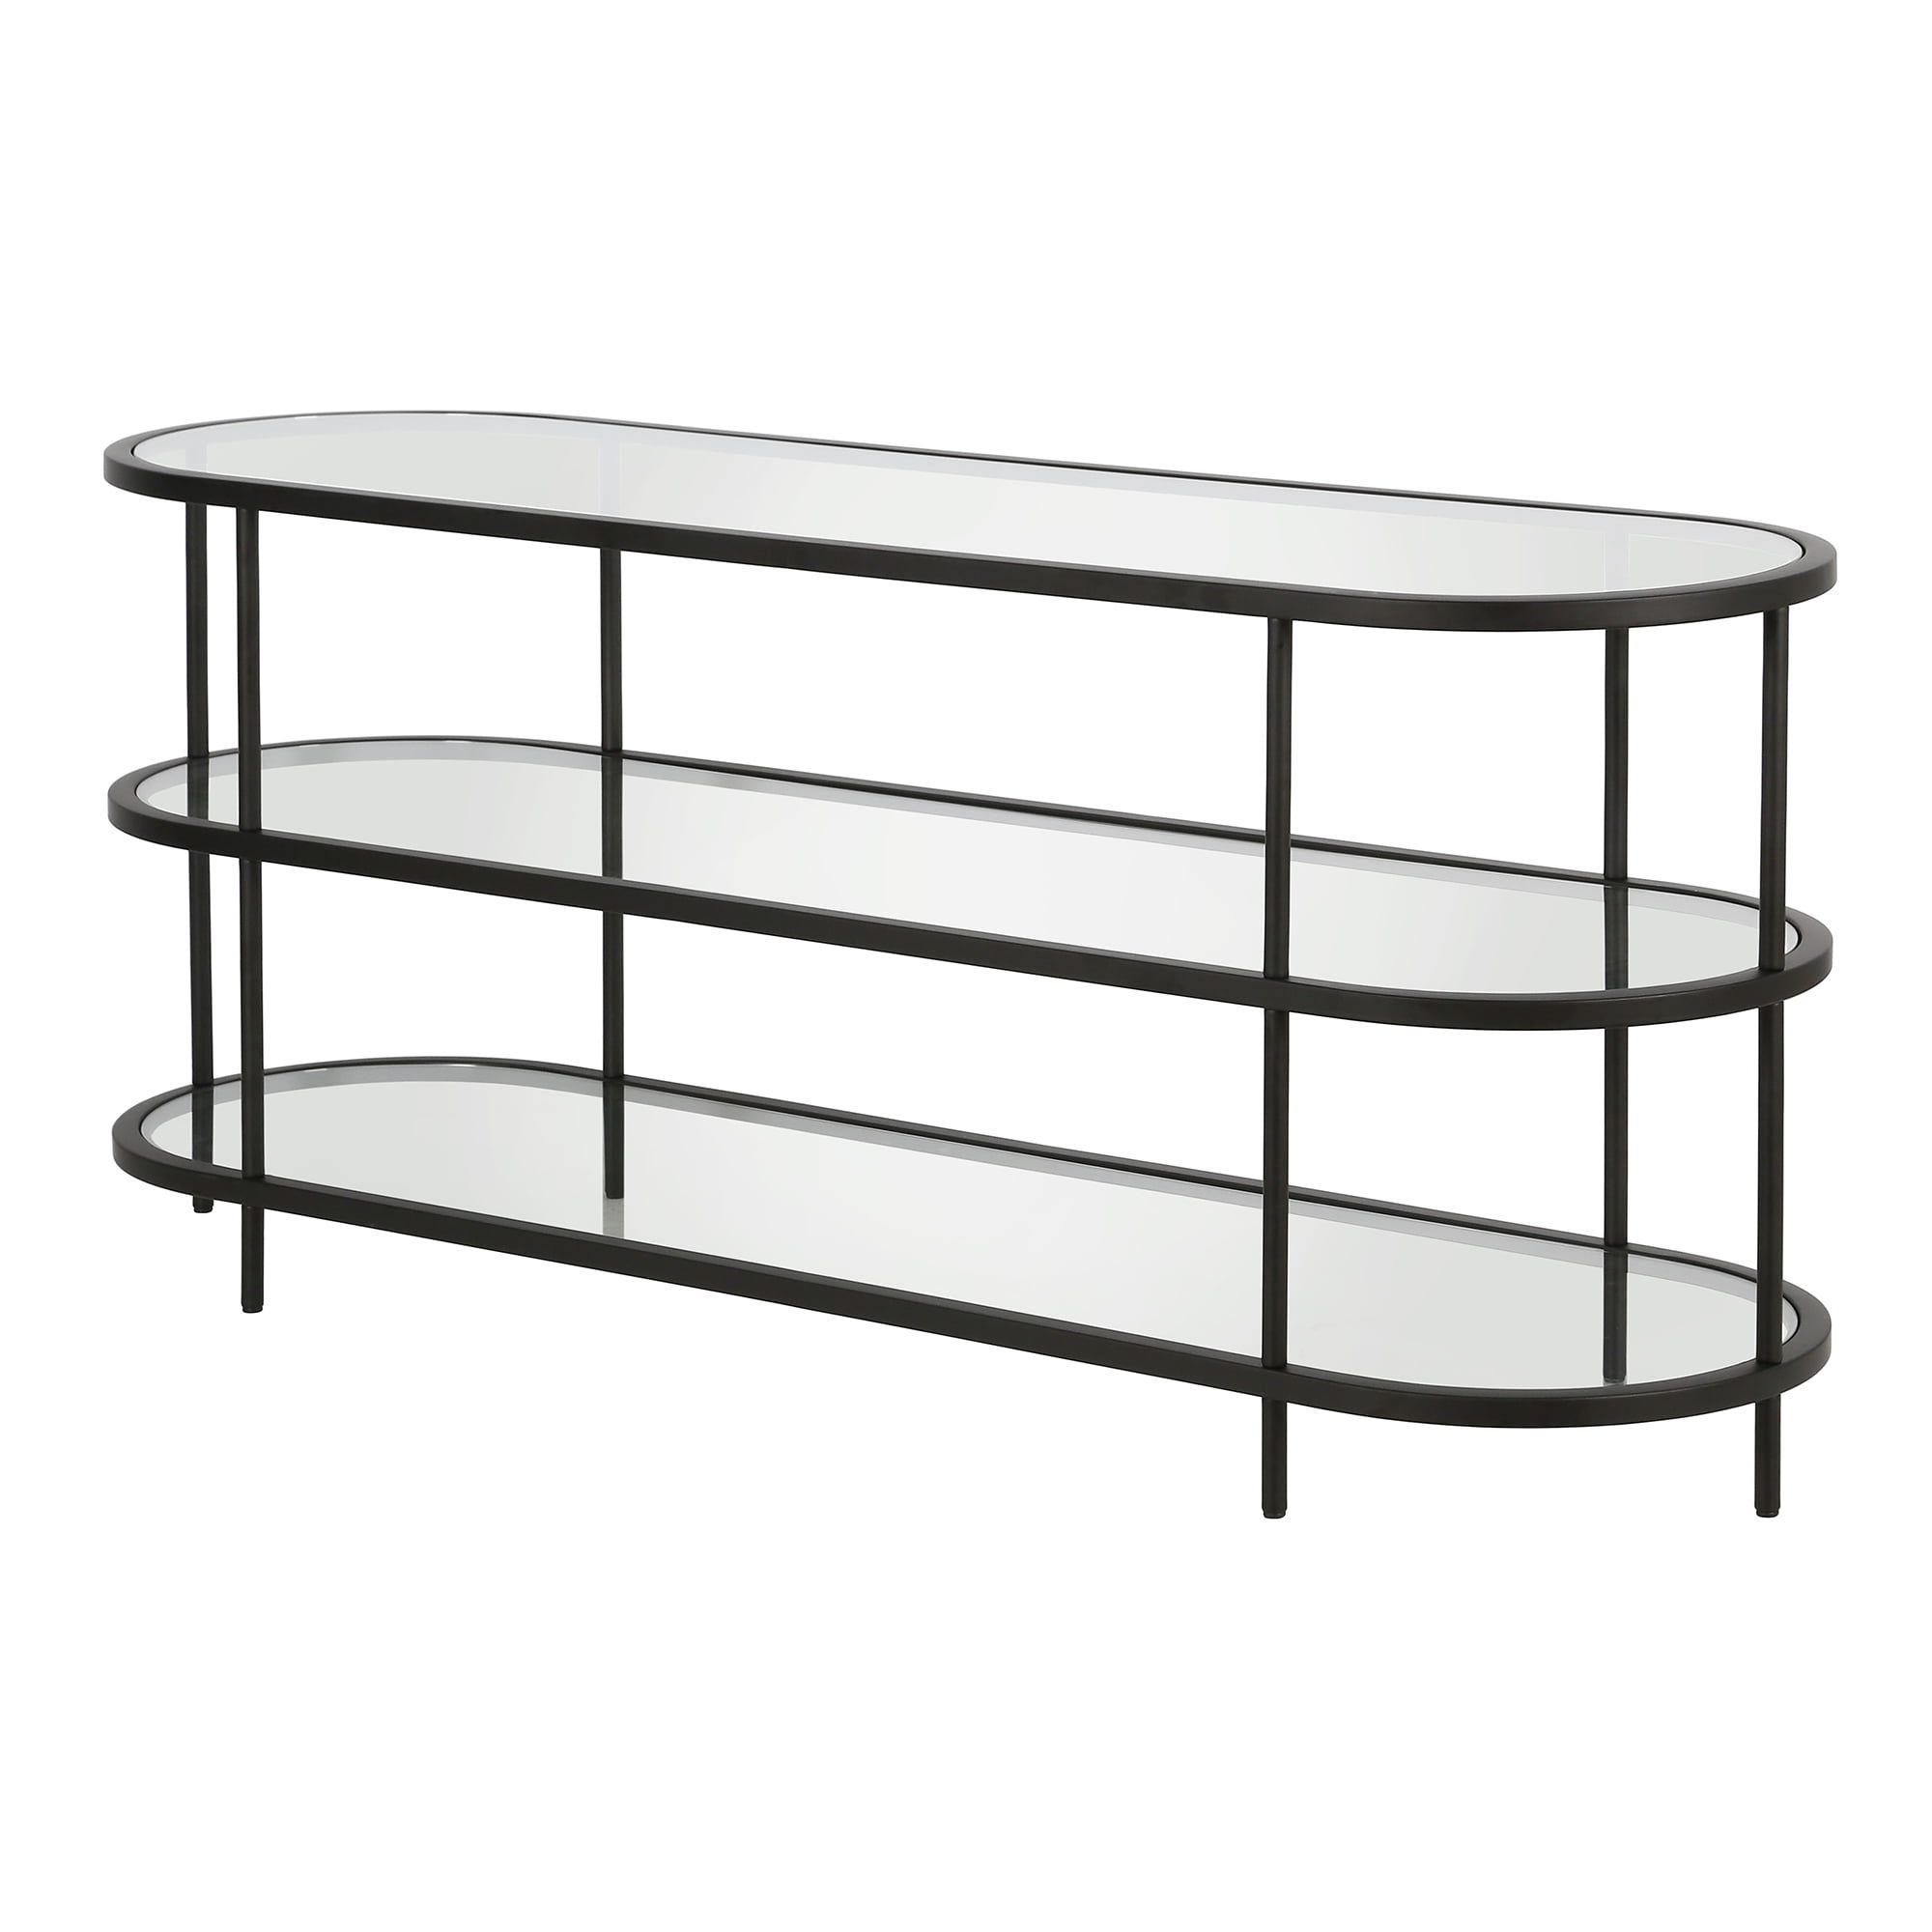 Fashionable Evelyn&zoe Mid Century Modern Metal Oval Tv Stand With Glass Top And Shelf  For Tvs Up To 60" – Walmart Within Metal Oval Tv Stands (View 6 of 10)